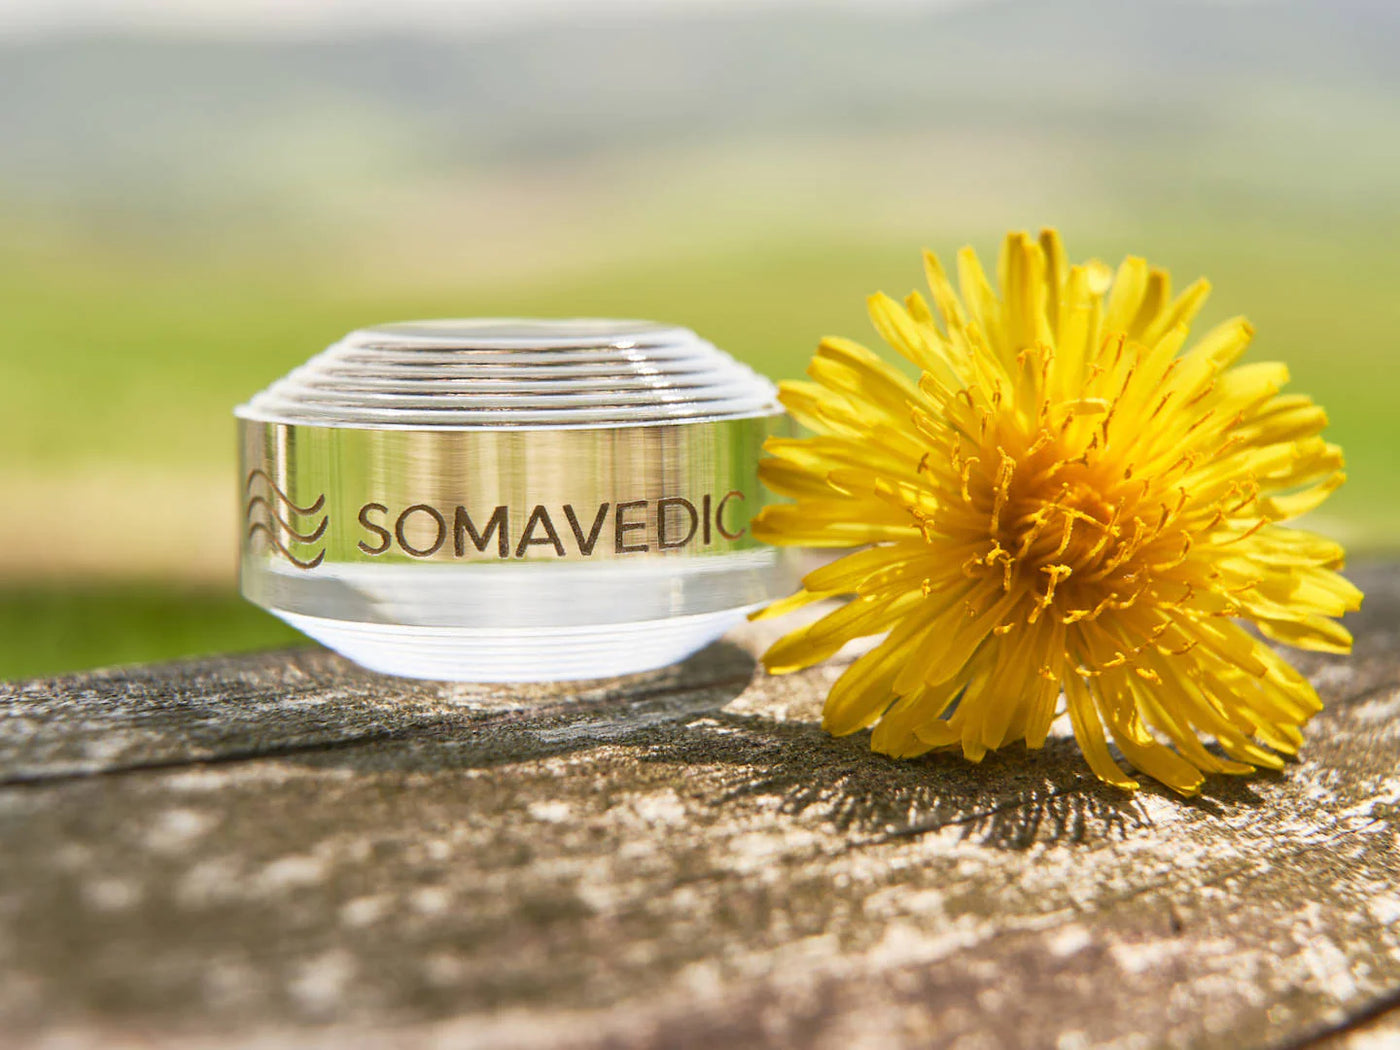 "Tiny in Pure" - EMF Protection You Can Take With You, by Somavedic (For Use with Larger Somavedic Device)